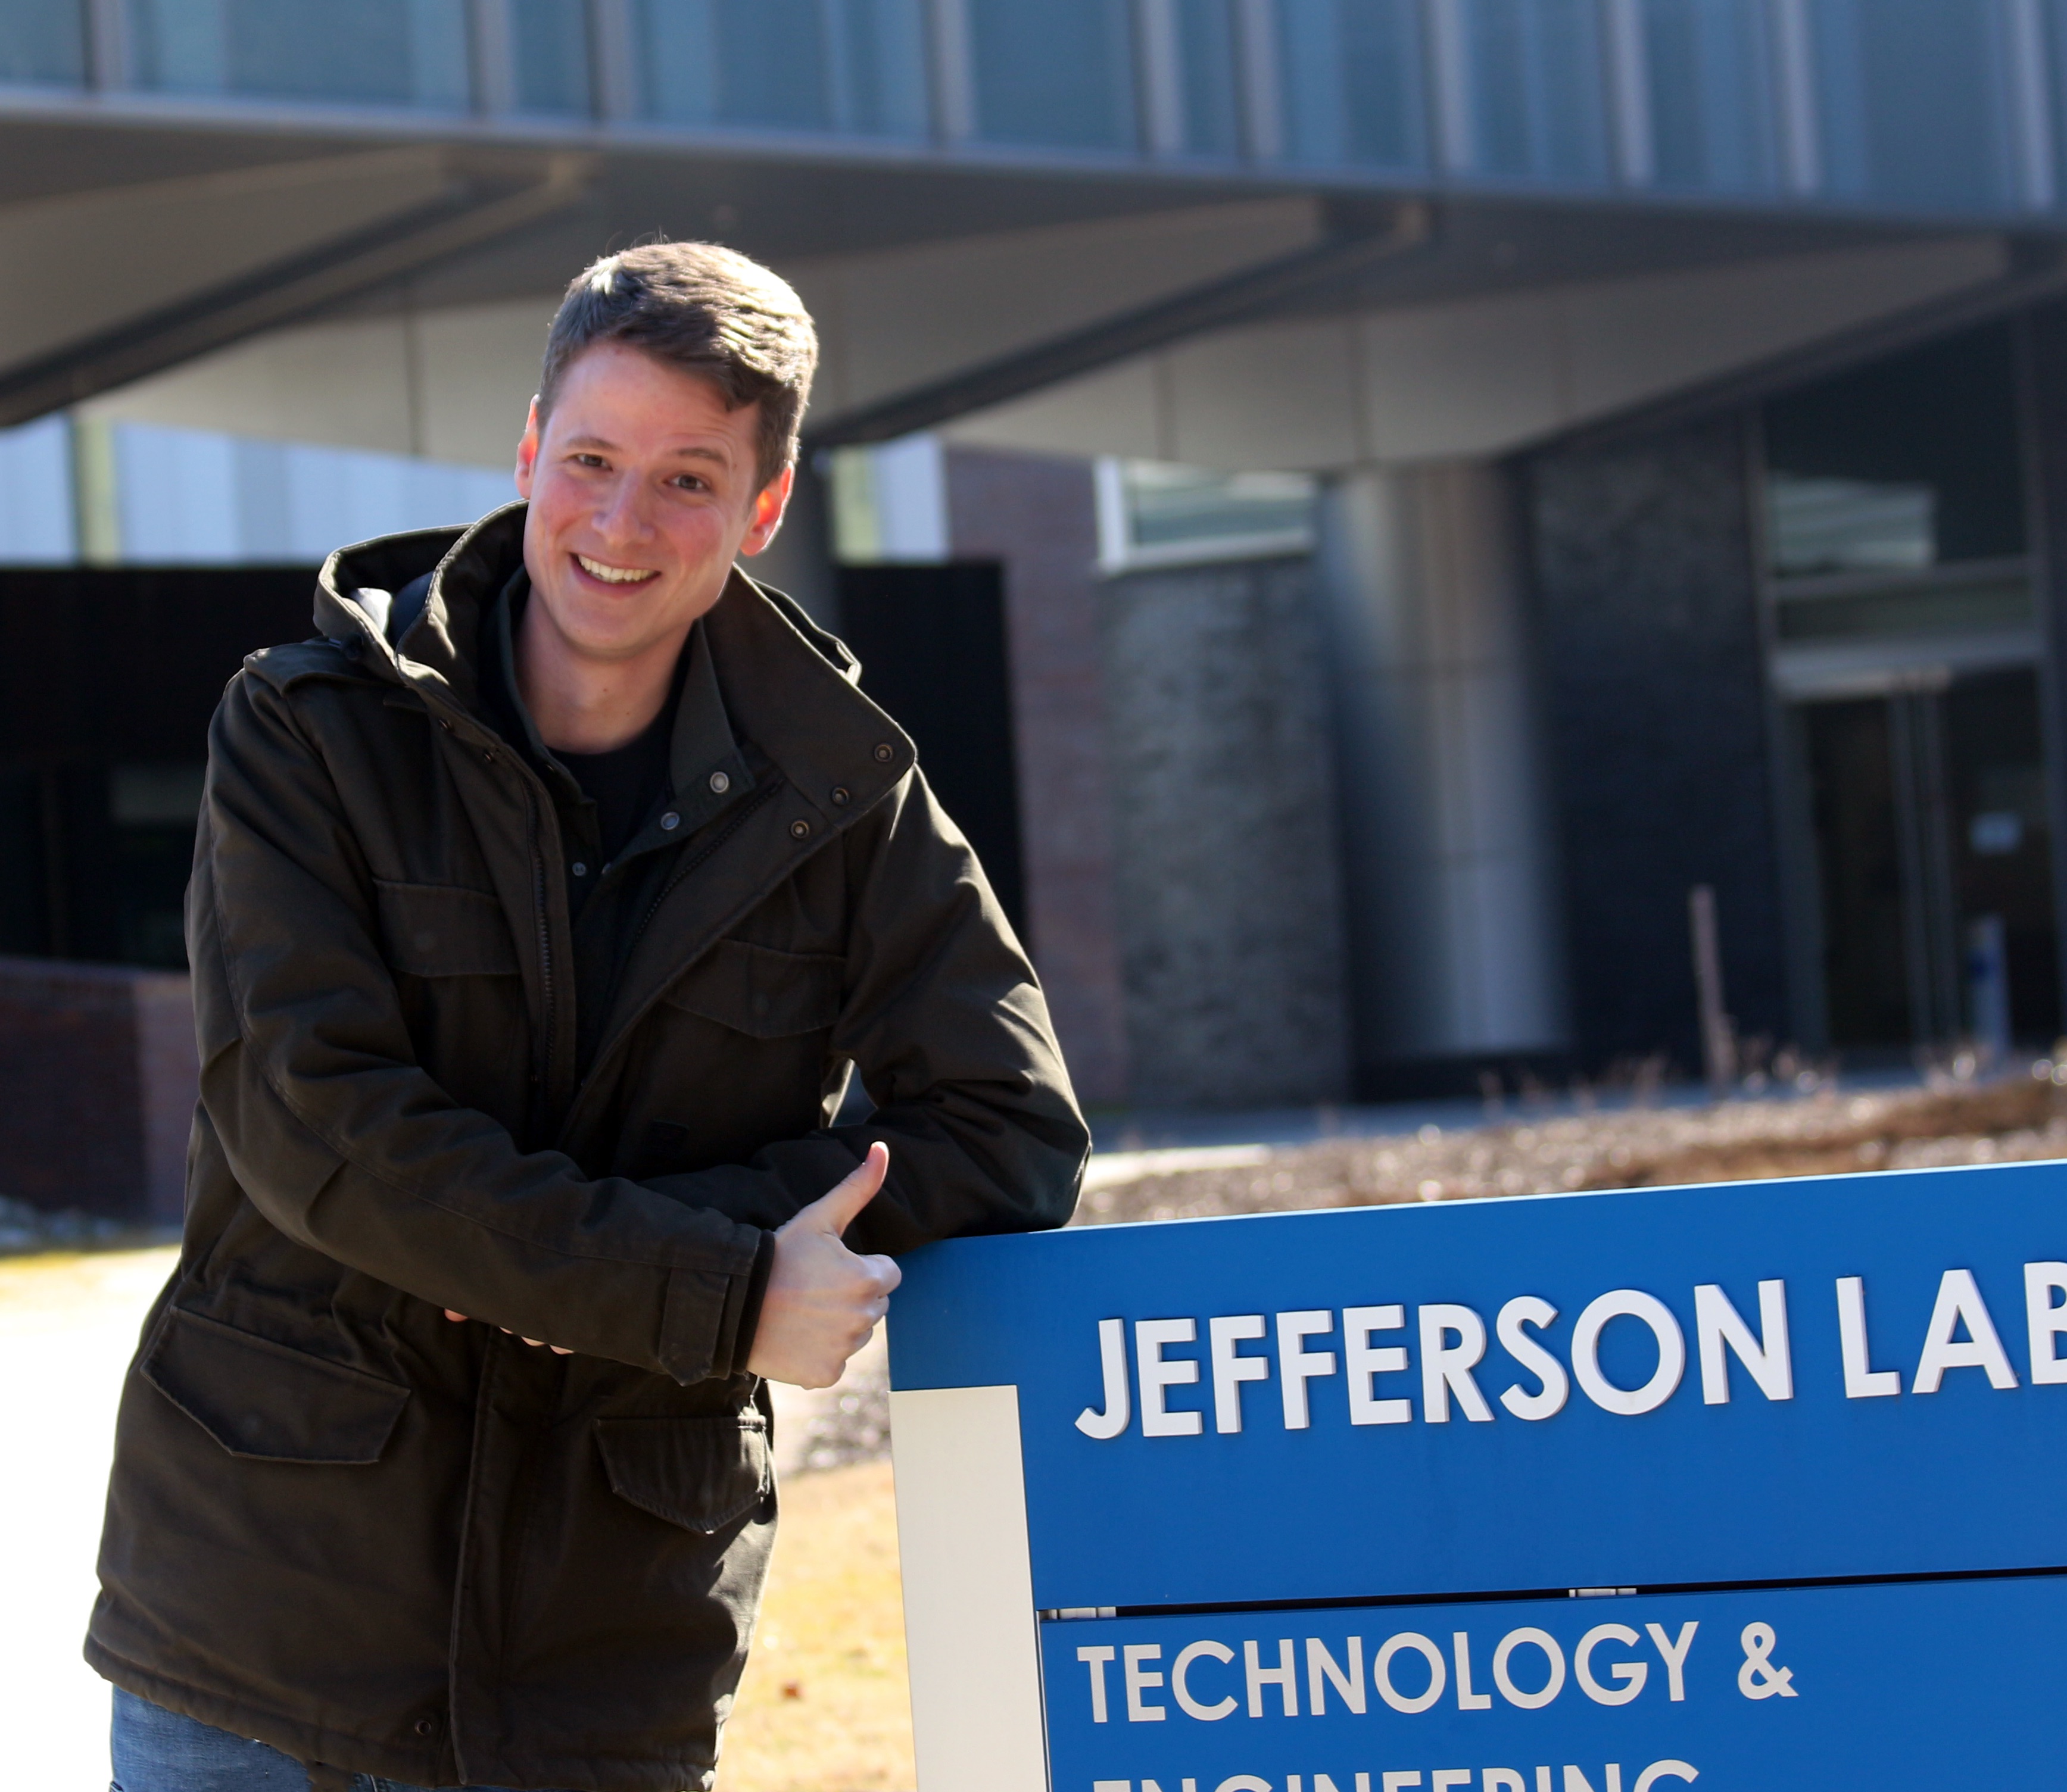 John Vennekate next to the blue building sign for the Jefferson Lab Technology and Engineering Development building